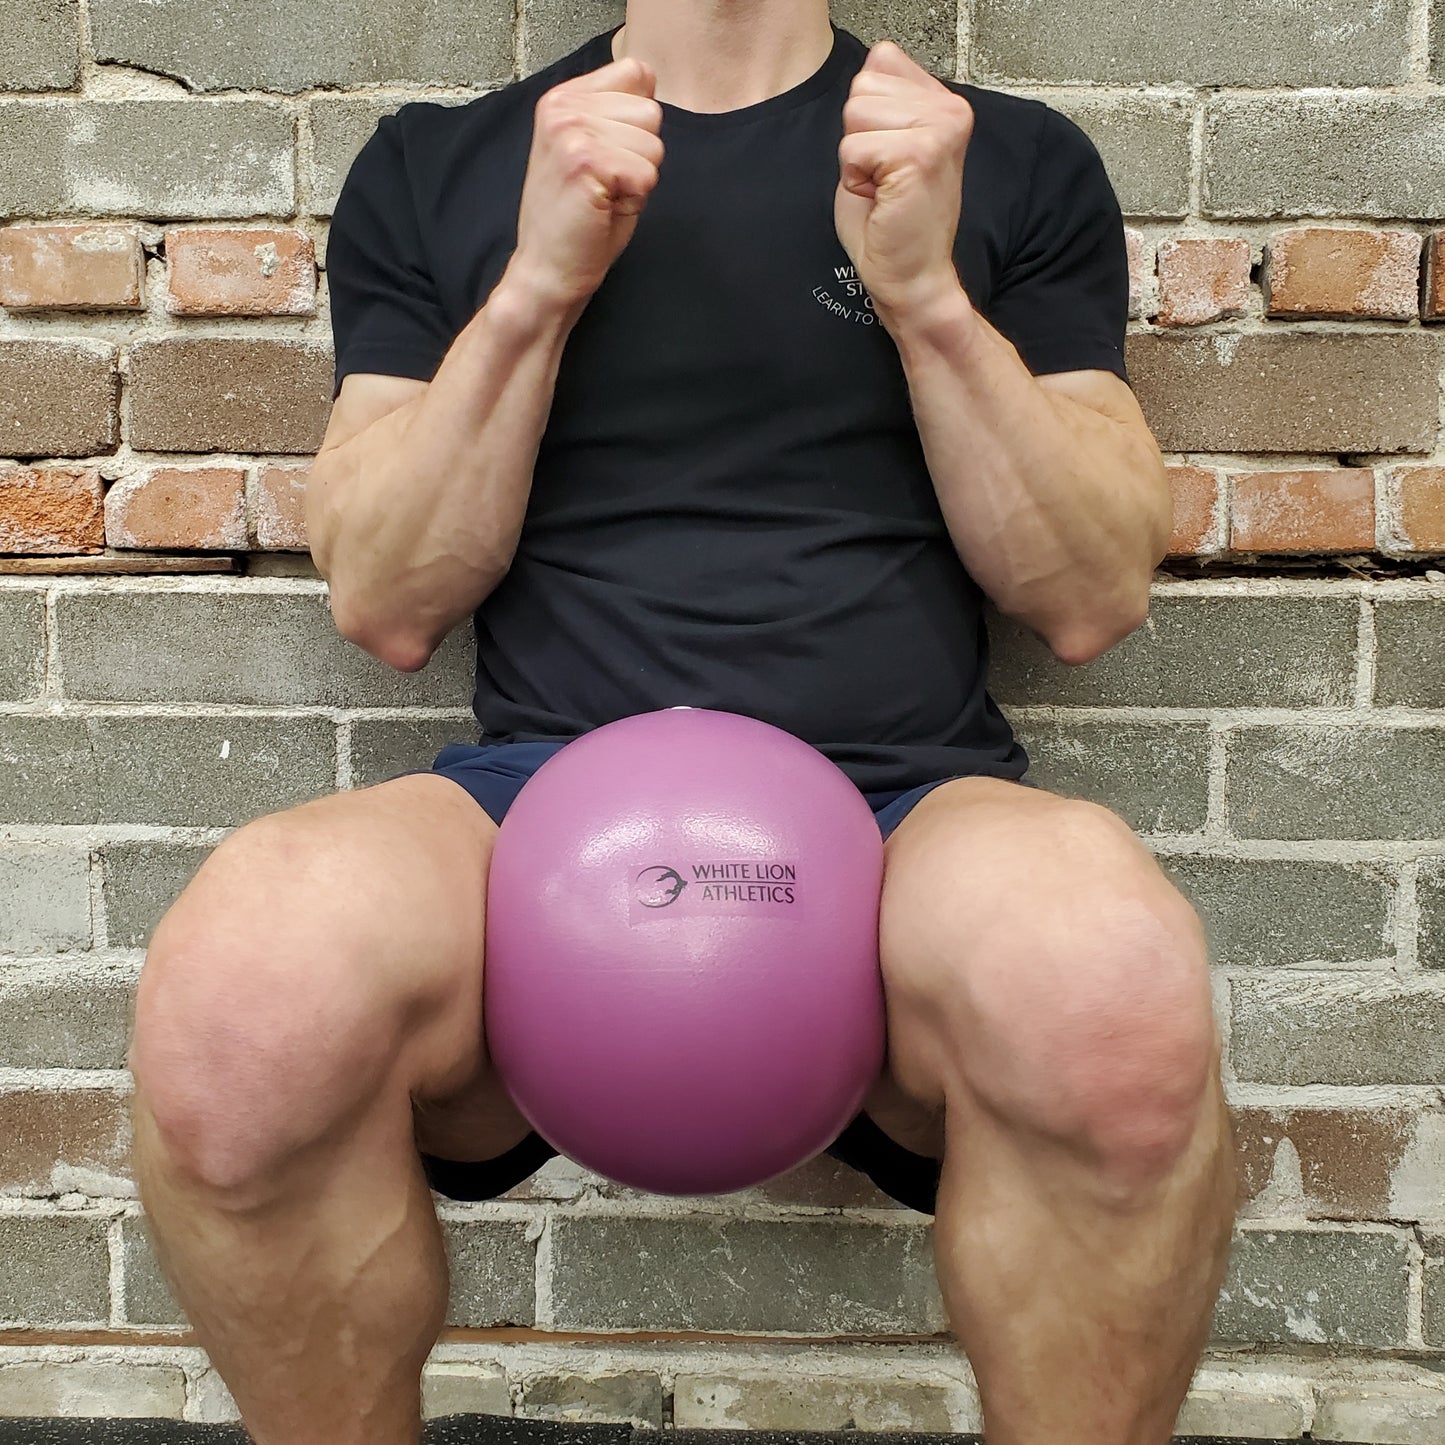 Best pilates ball exercise. Wall sit with hip adduction